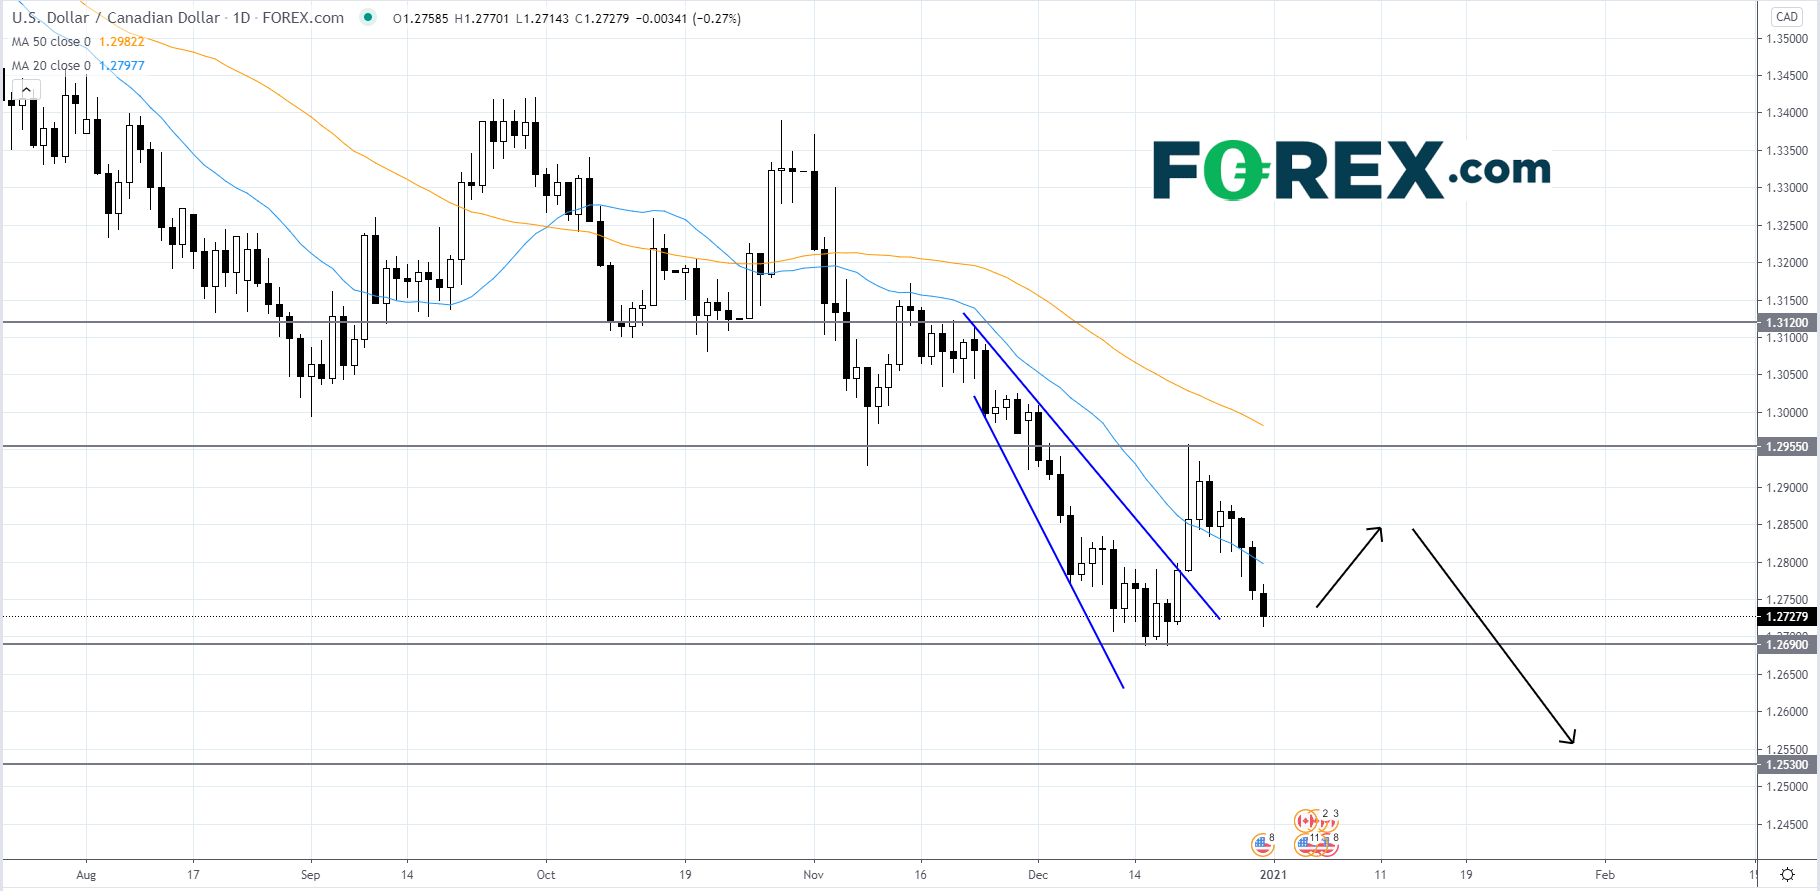 Market chart of US Dollar(USD) to CAD. Published in December 2020 by FOREX.com